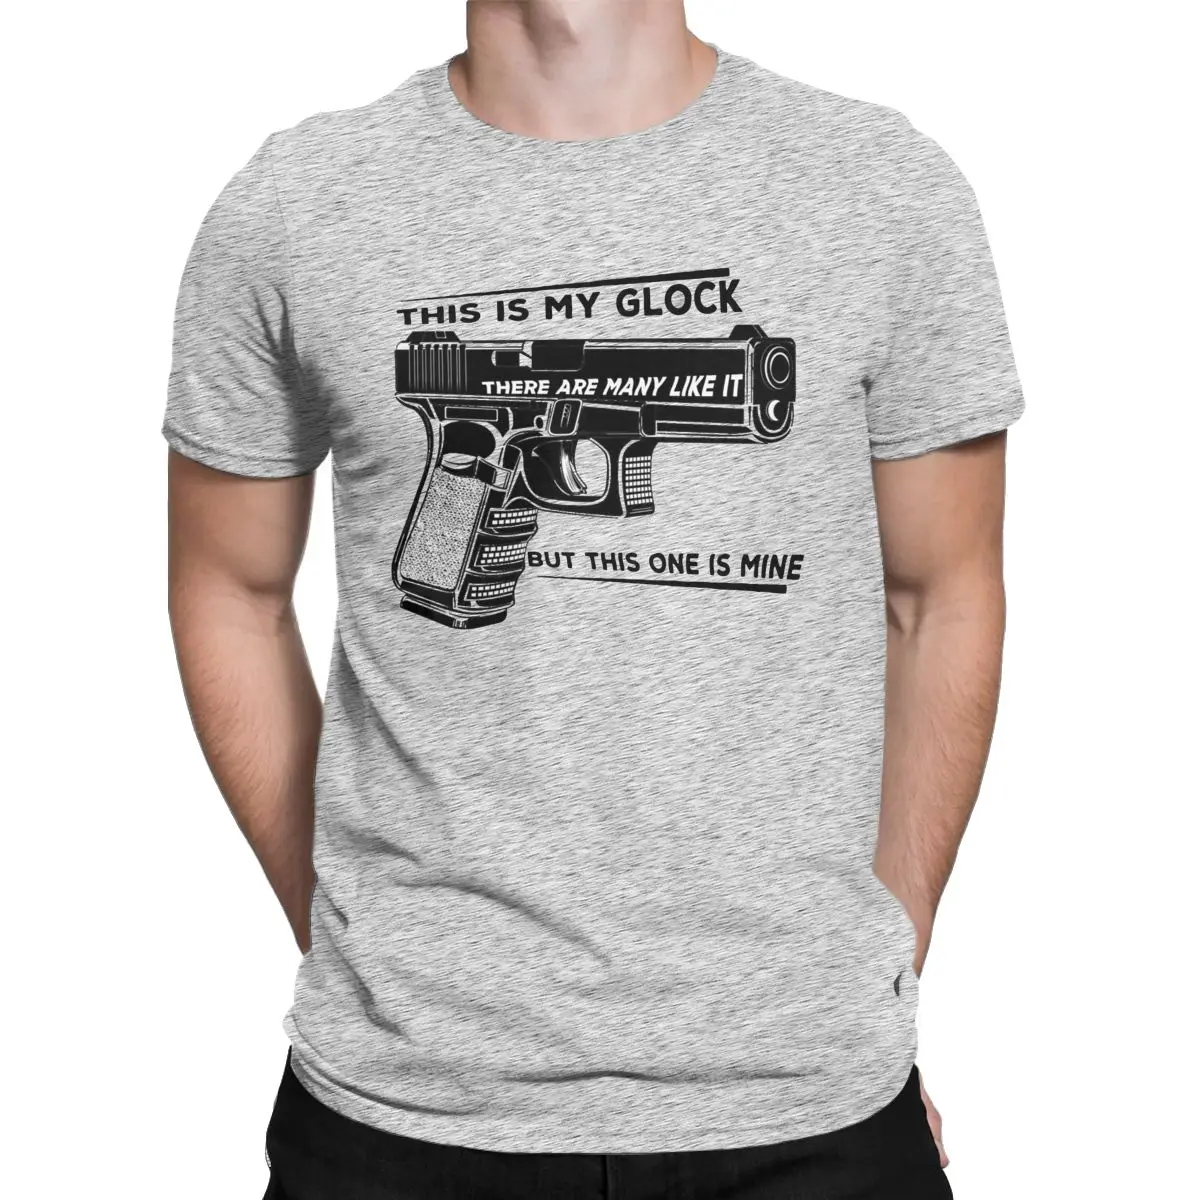 Men's shirt This Is My Glock This One Is Mine Cotton Clothing Leisure Short Sleeve O Neck Tee Shirt Plus Size T-Shirt